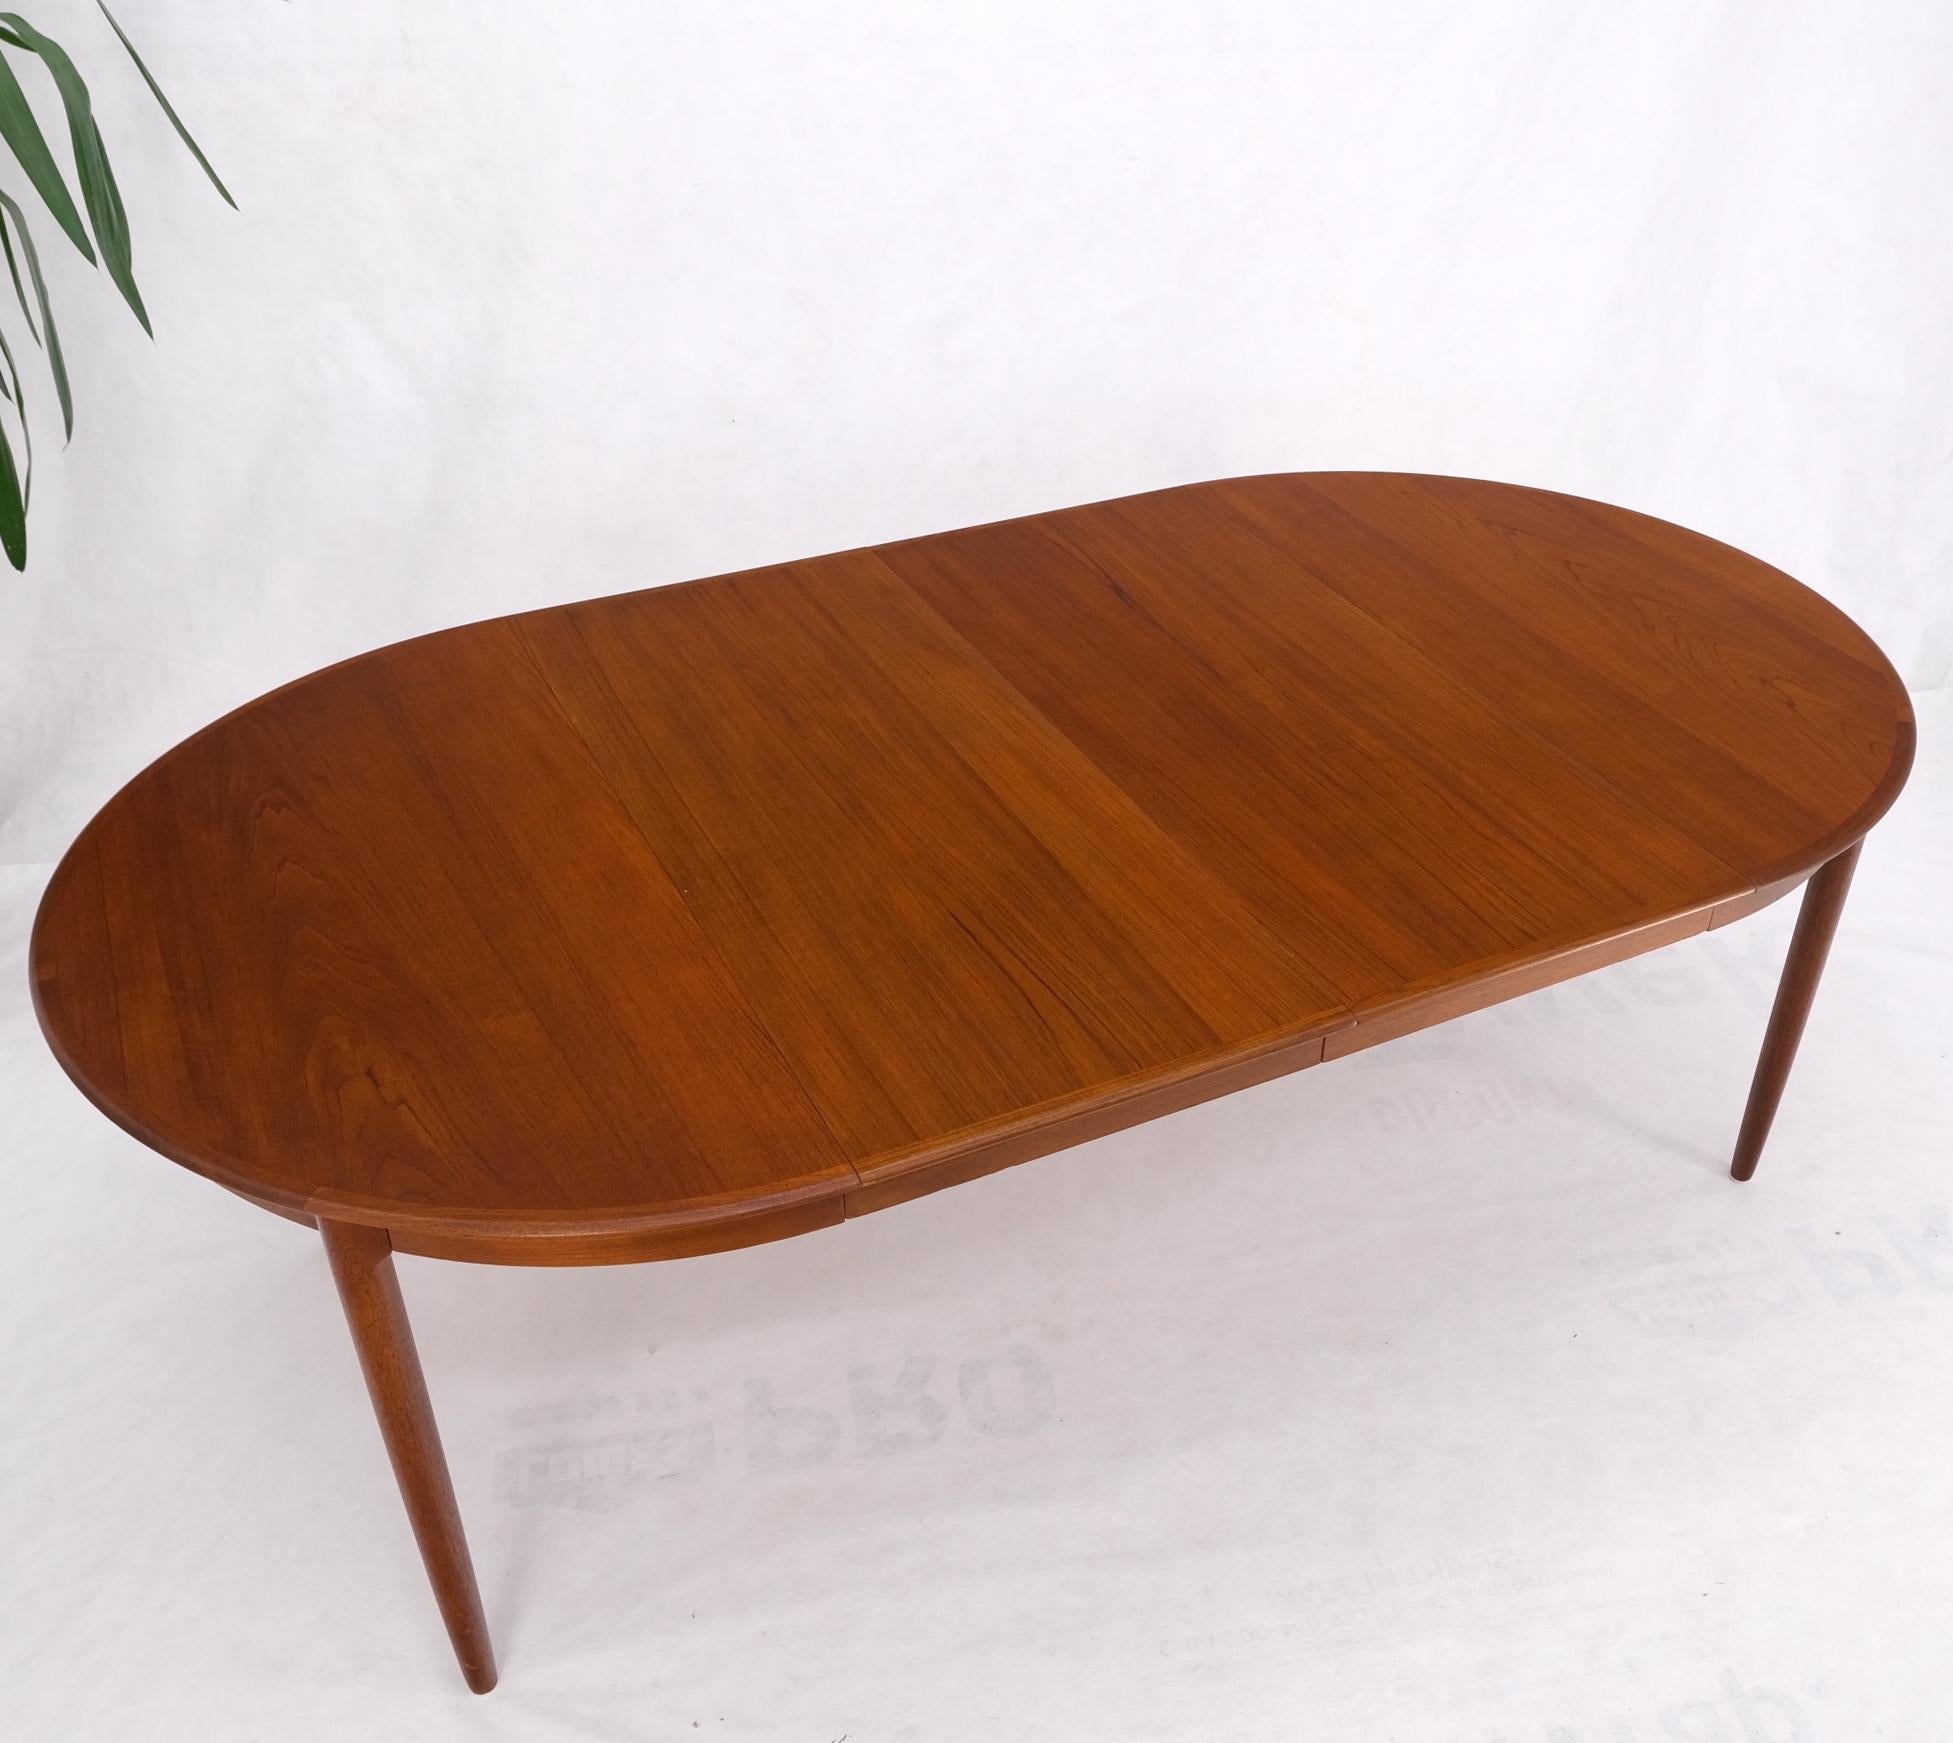 Danish Teak Mid-Century Modern Round Dining Table w/ Two Extension Boards Leafs For Sale 7